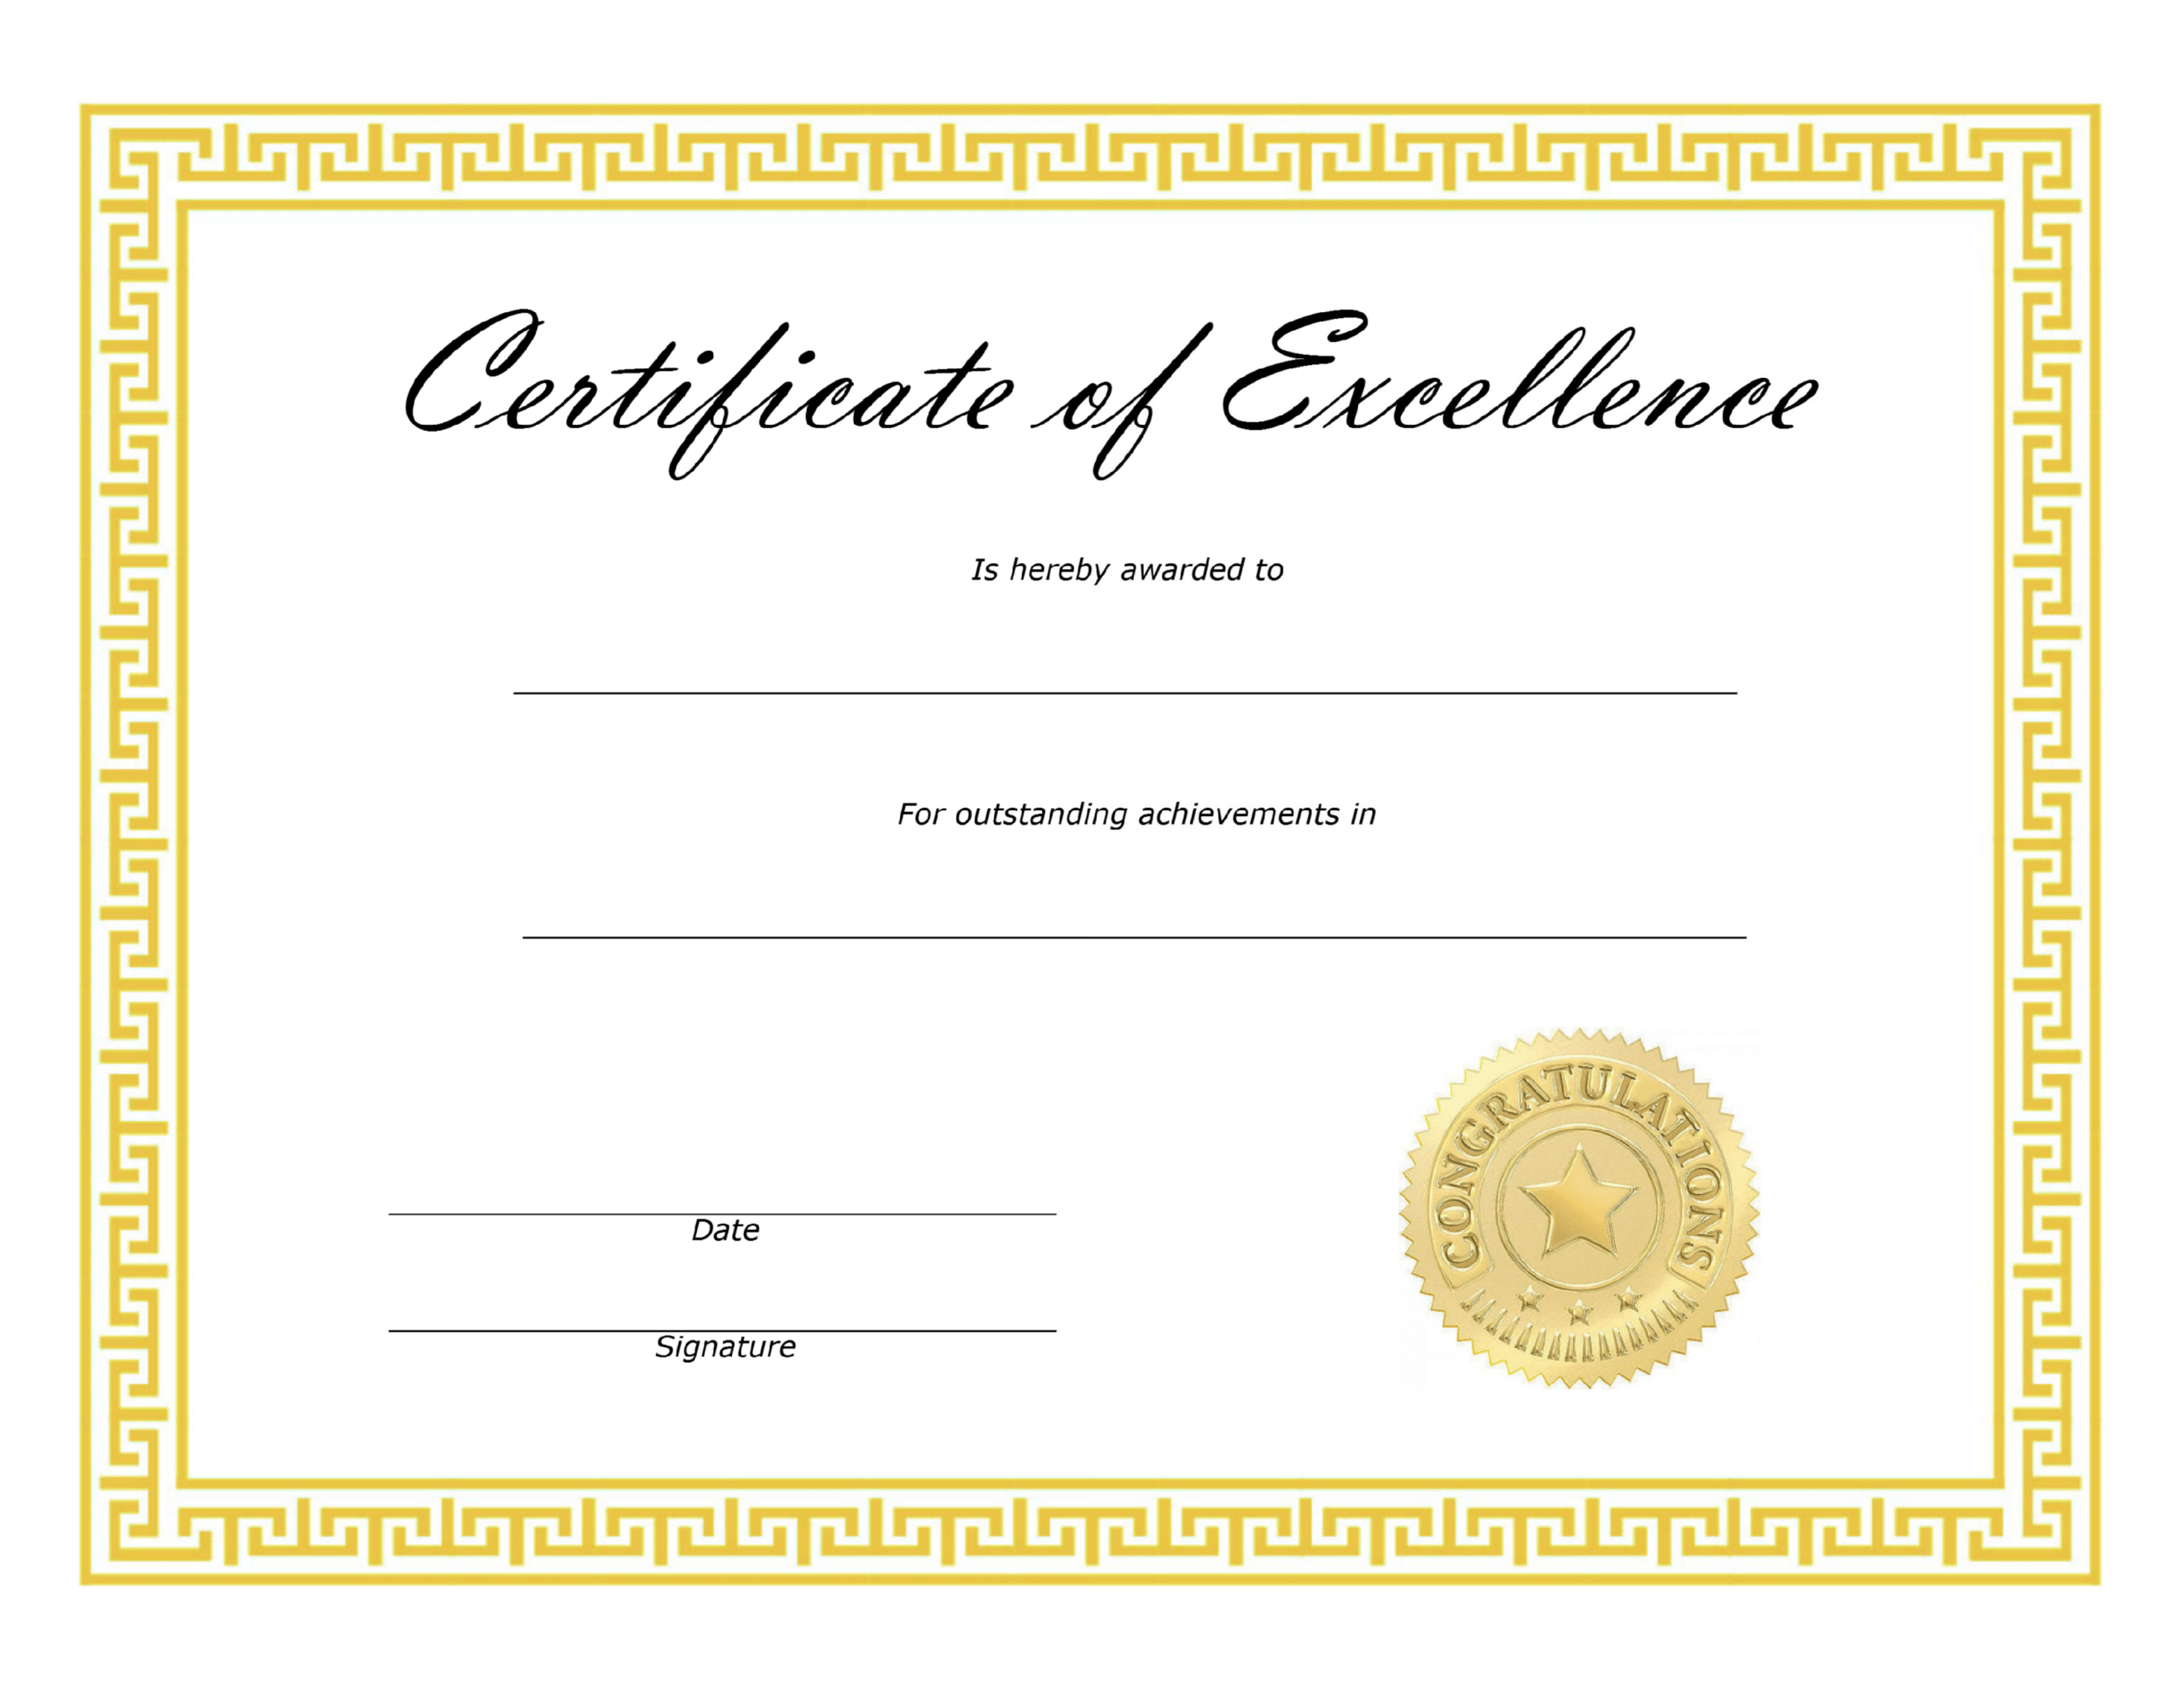 ❤️ Free Sample Certificate Of Excellence Templates❤️ In Free Certificate Of Excellence Template